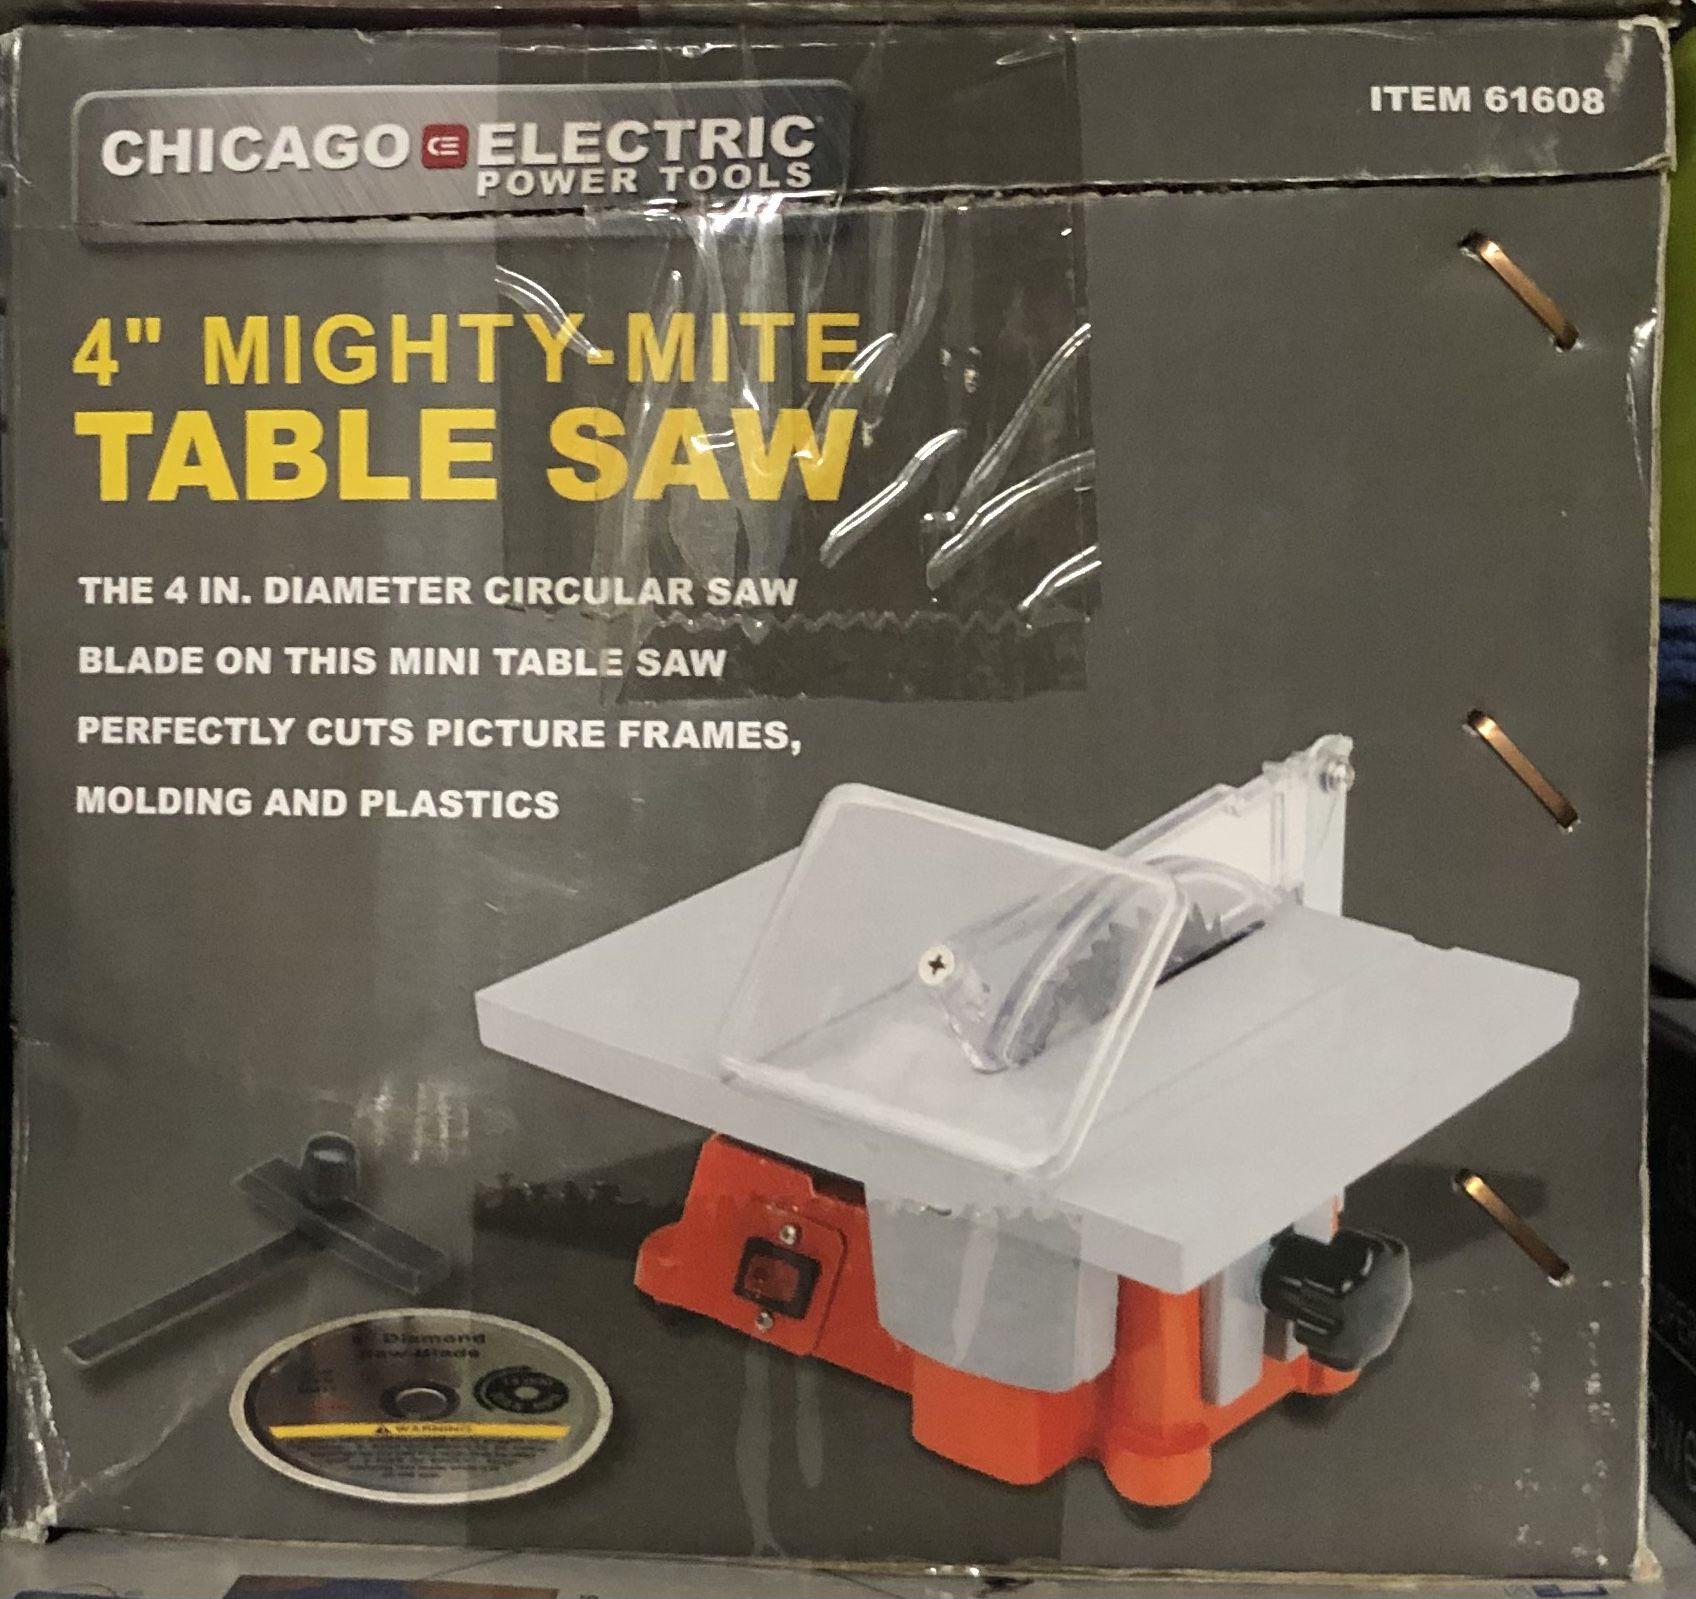 Table Saw 4” Mighty-Mite